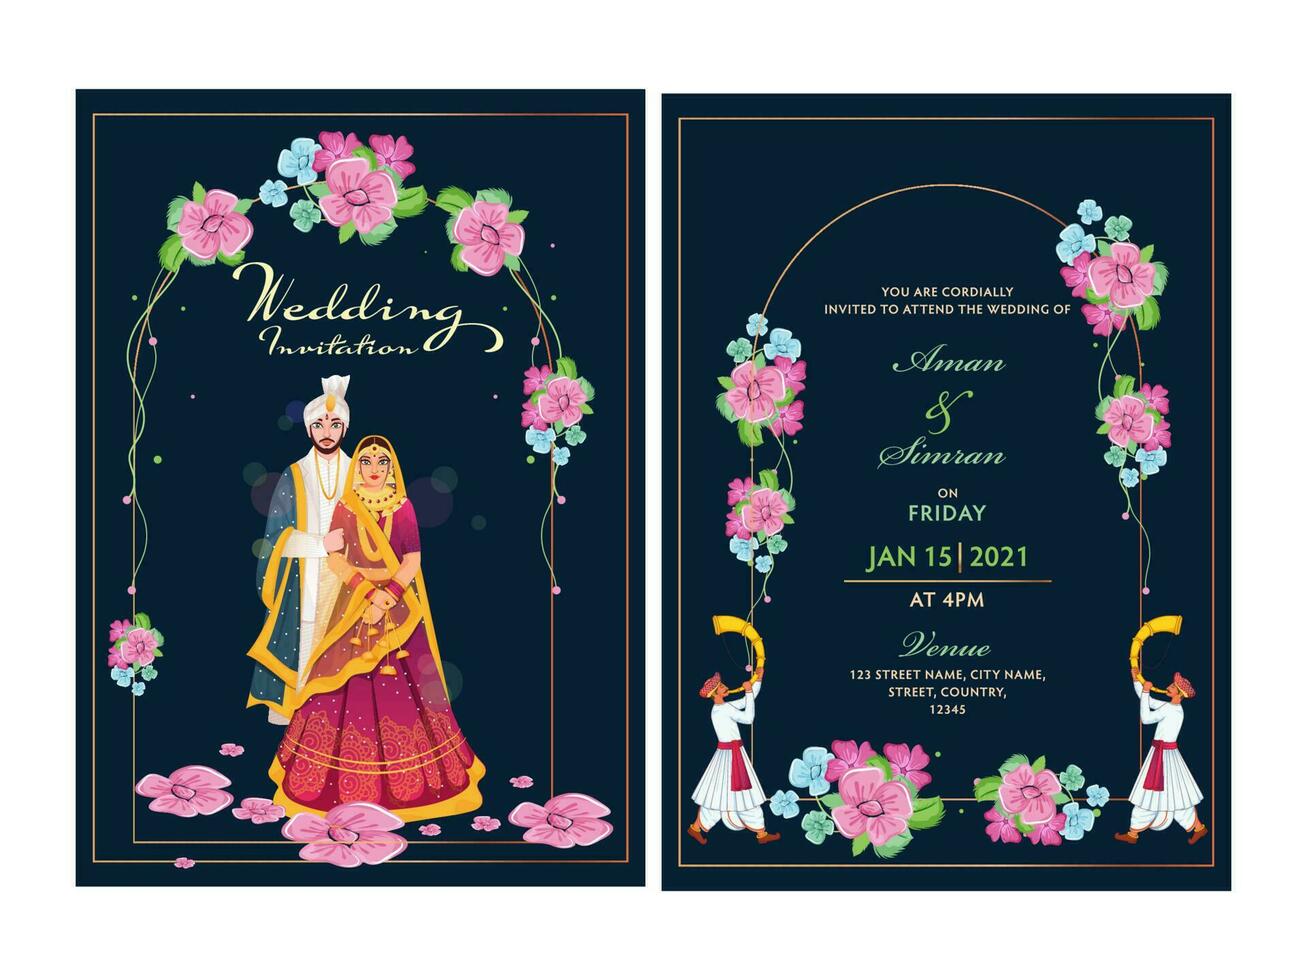 Floral Wedding Invitation Card Design Set with Indian Couple Image and Venue Details. vector